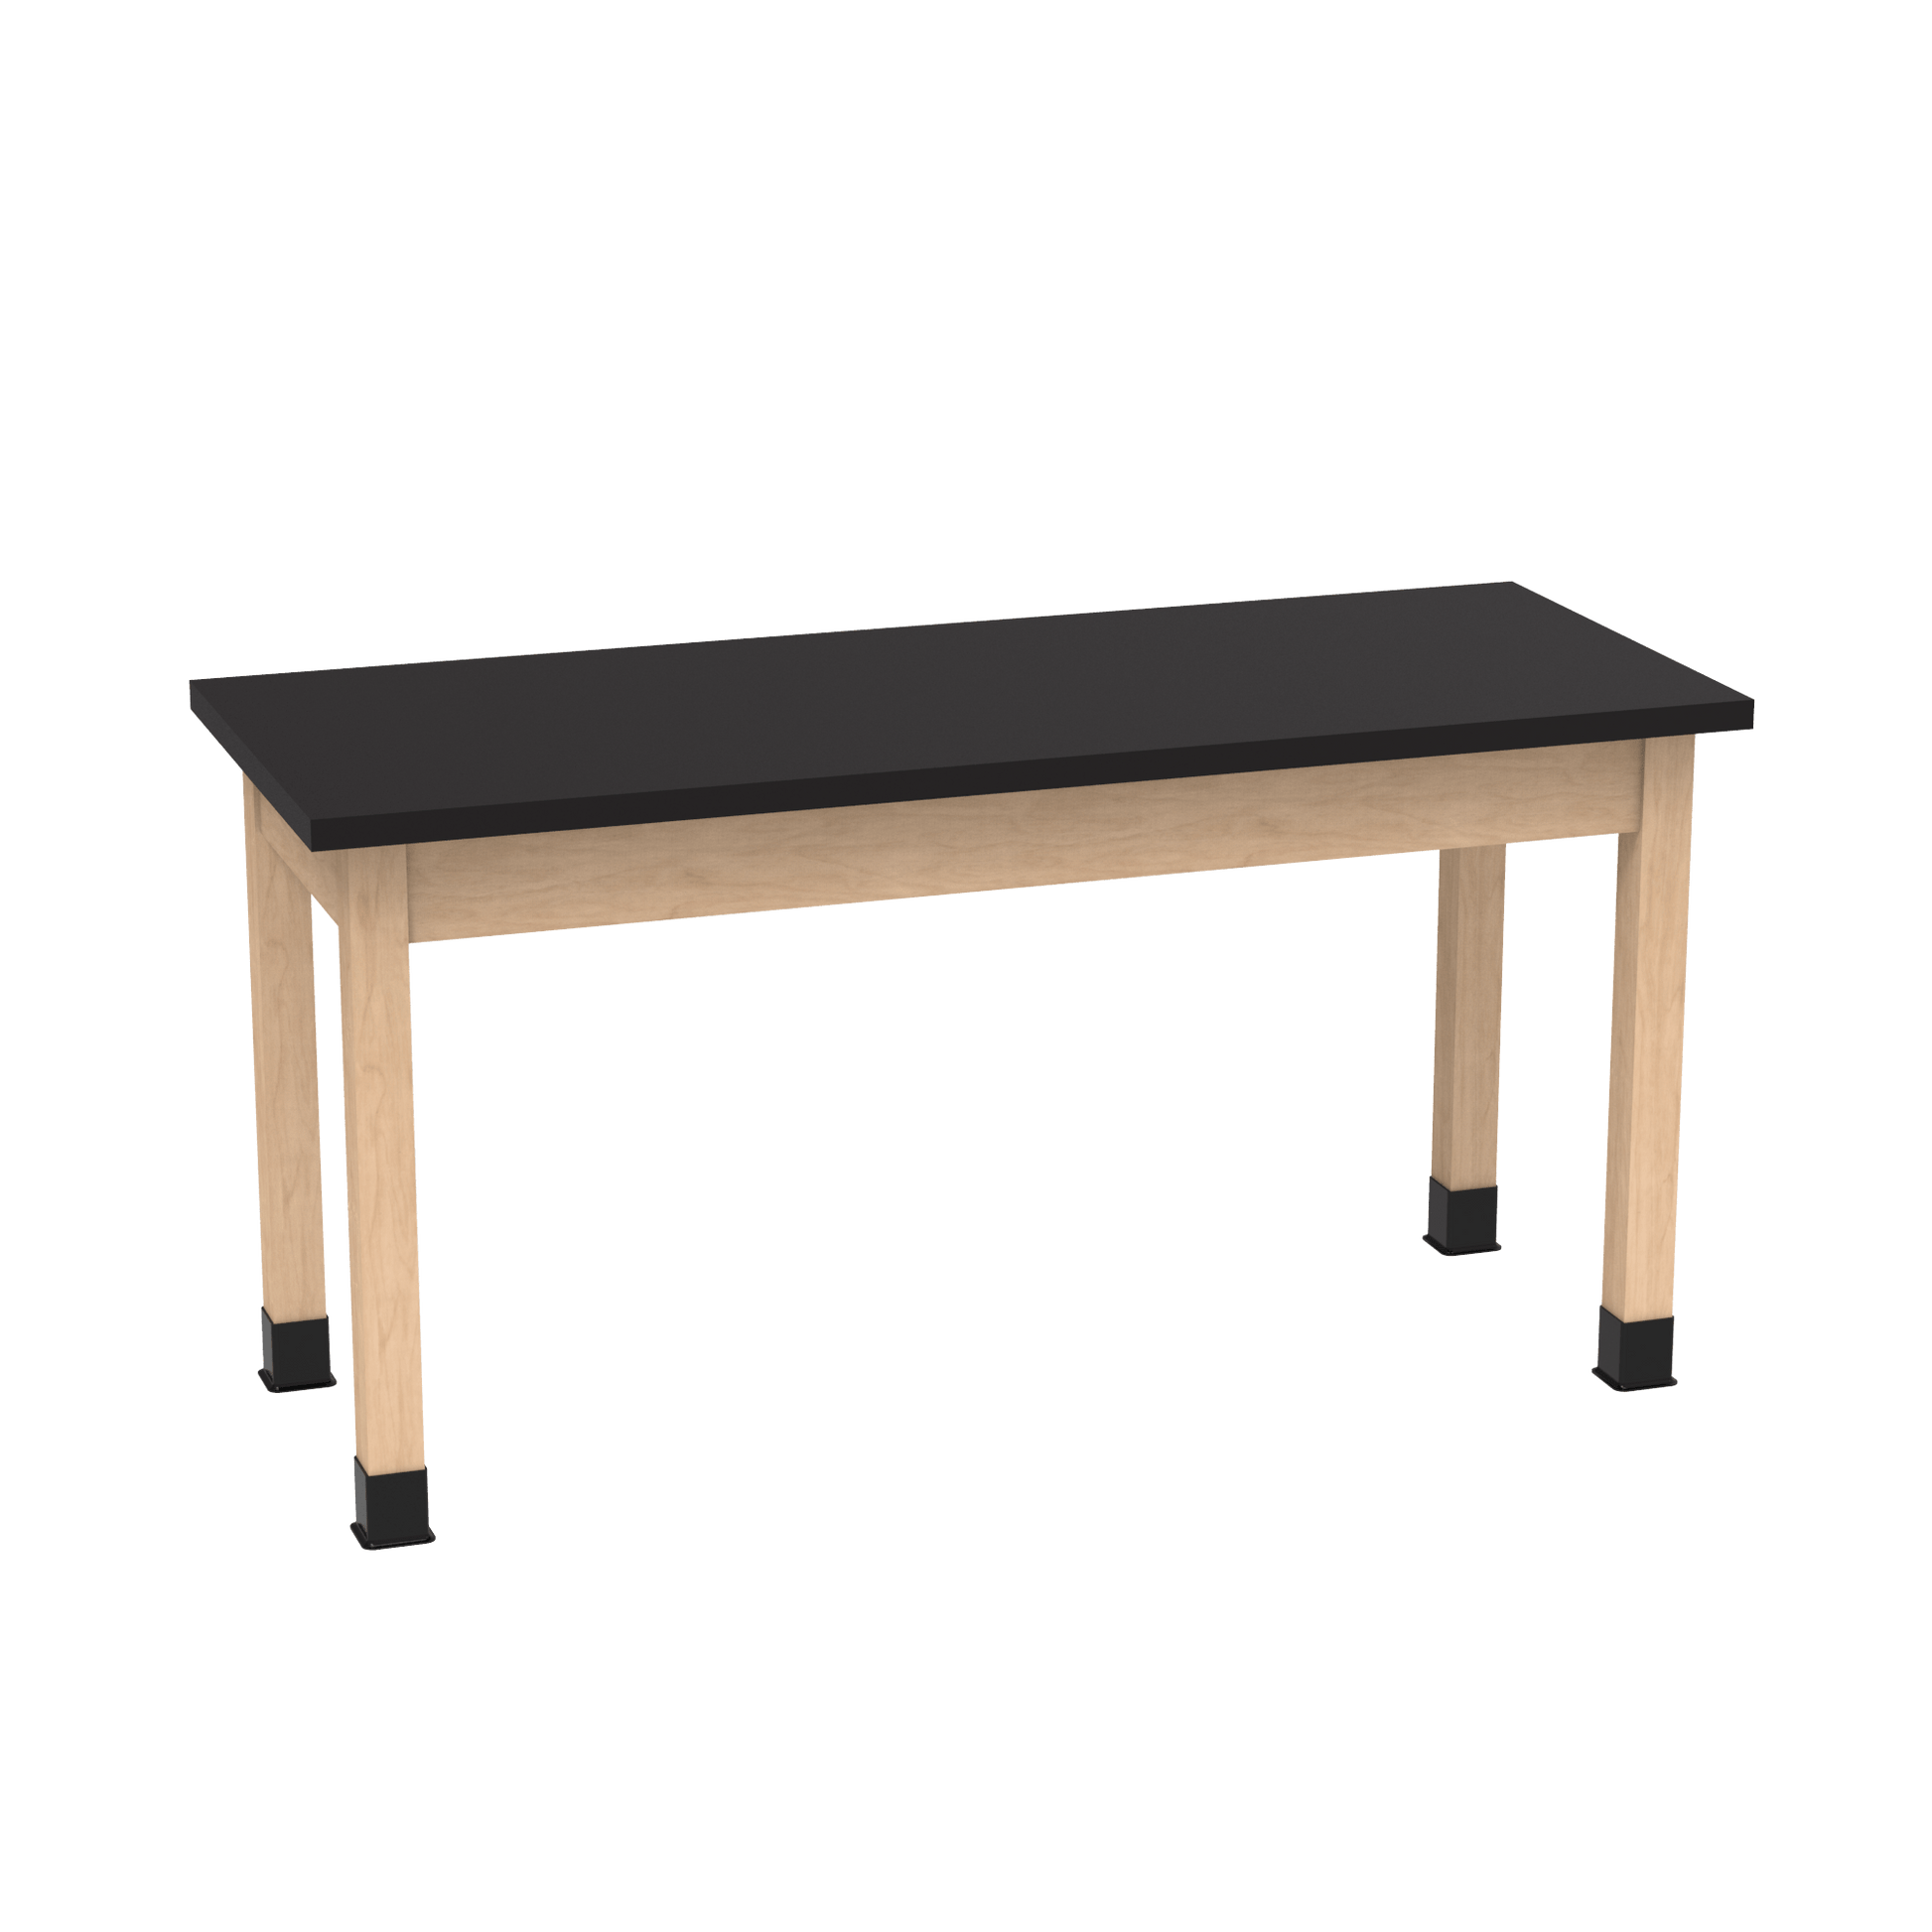 Diversified Woodcrafts Science Table - Plain Apron - 48" W x 30" D - Solid Wood Frame and Adjustable Glides - SchoolOutlet